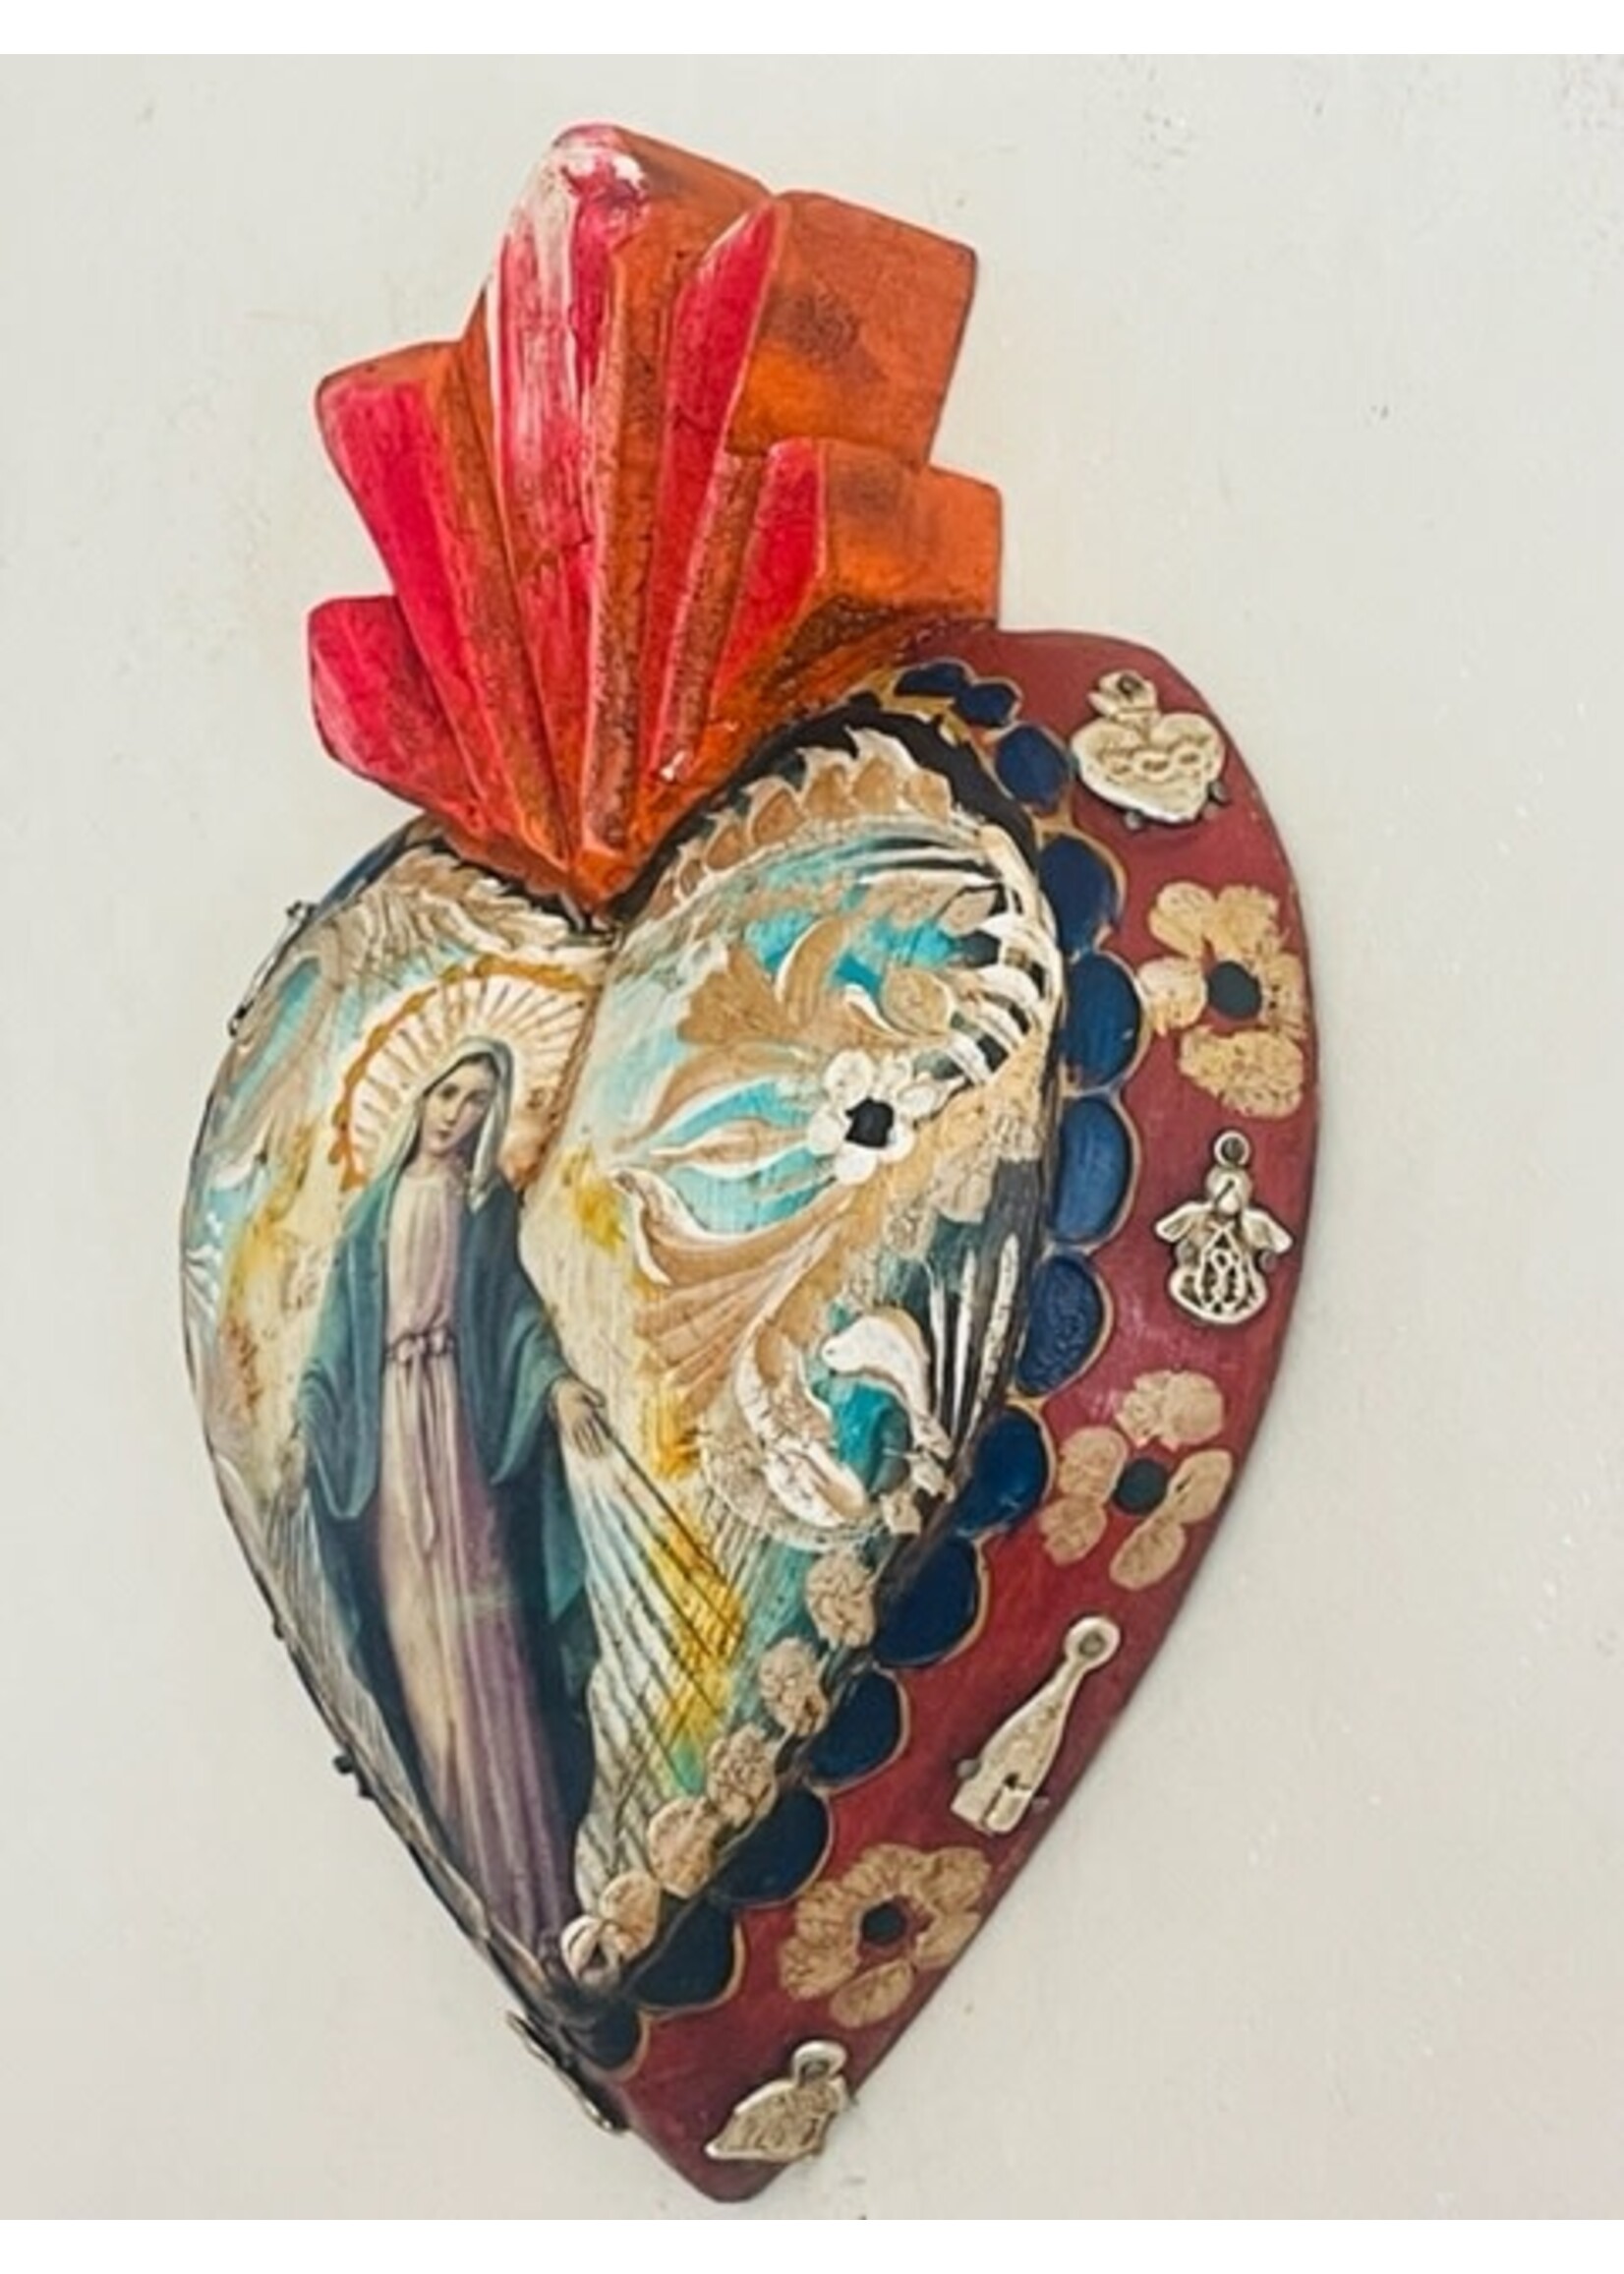 Our Lady of Grace hand painted wood heart